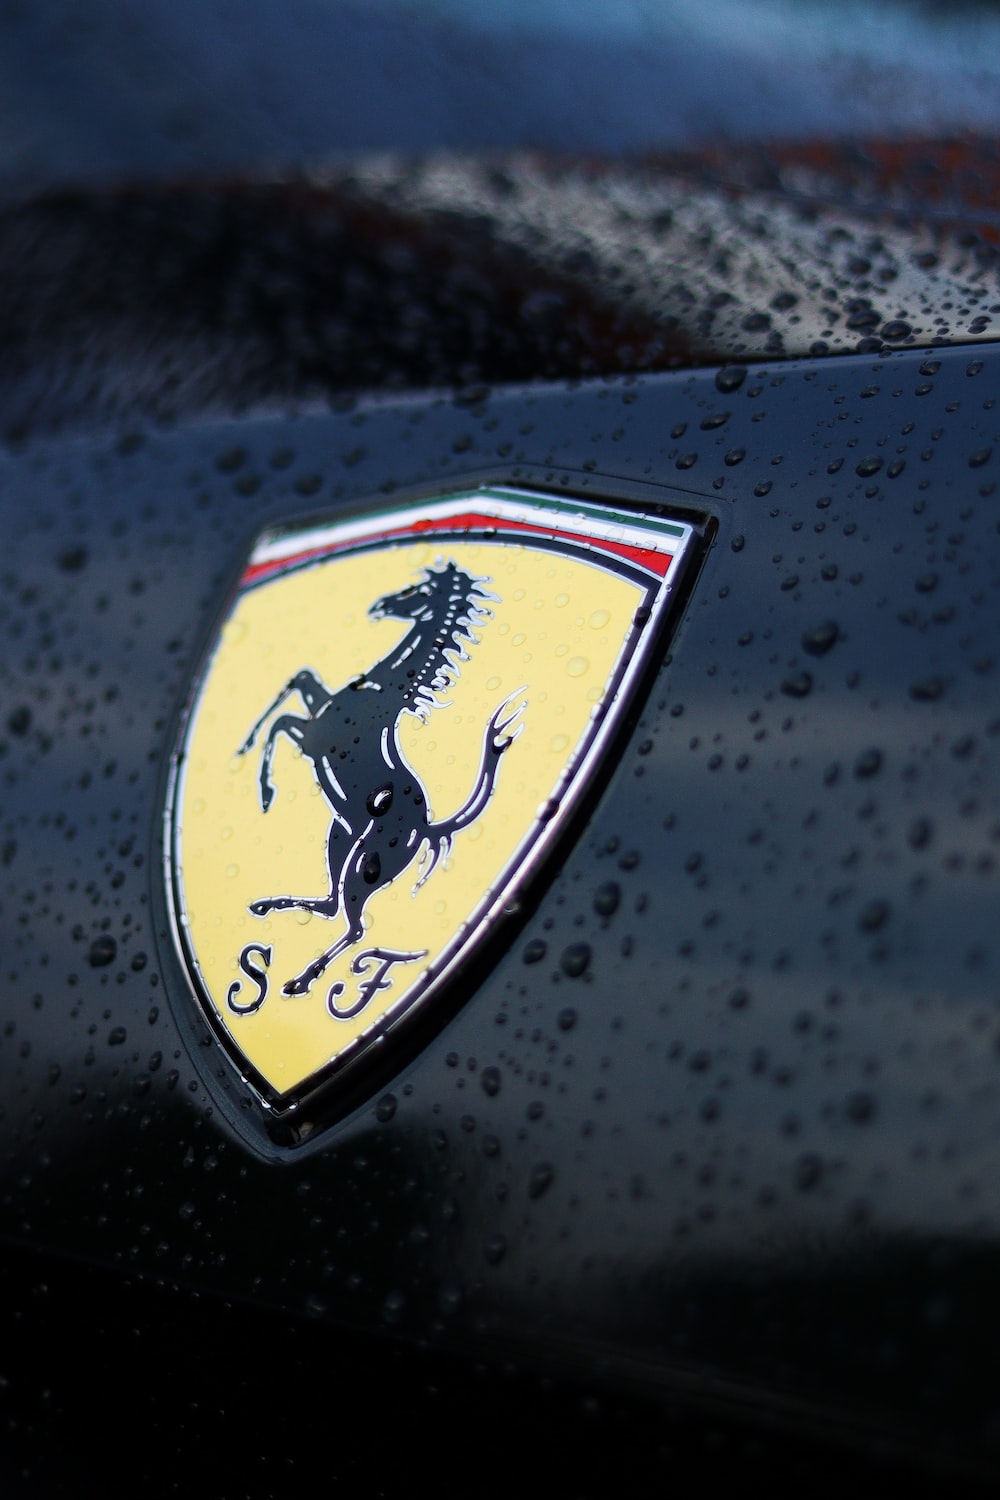 Ferrari logo pictures download free images on